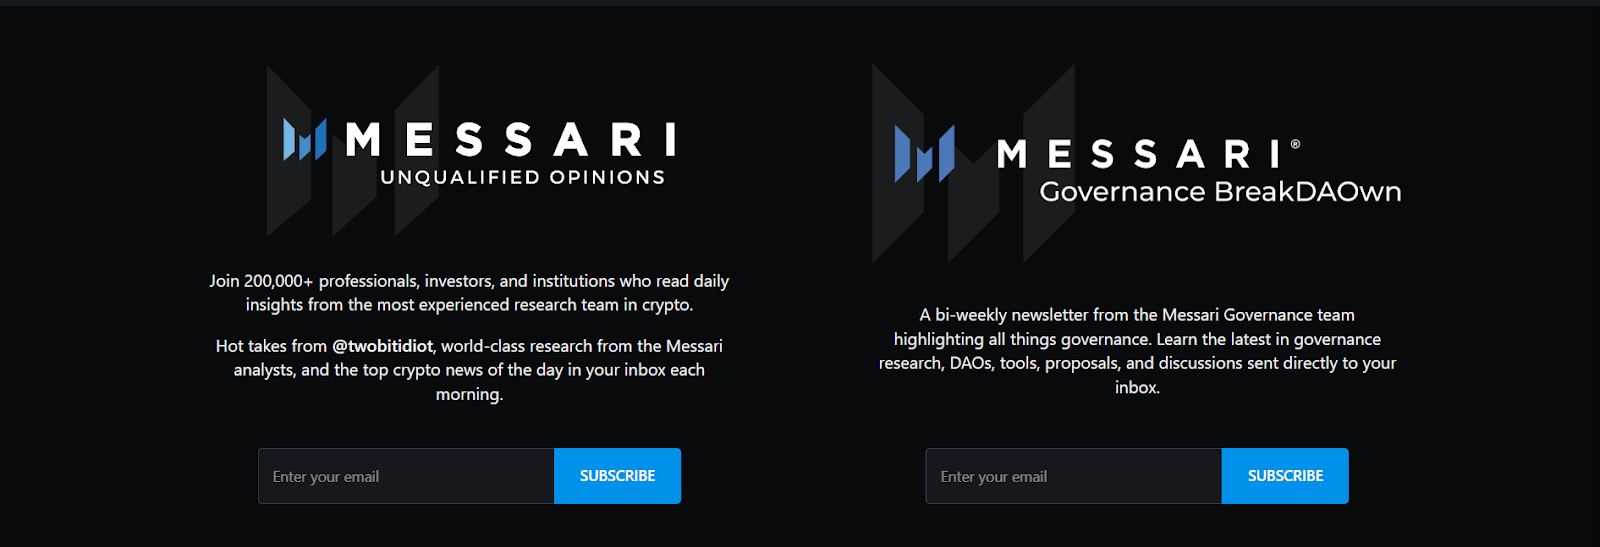 An image showcasing the two types of newsletters Messari has